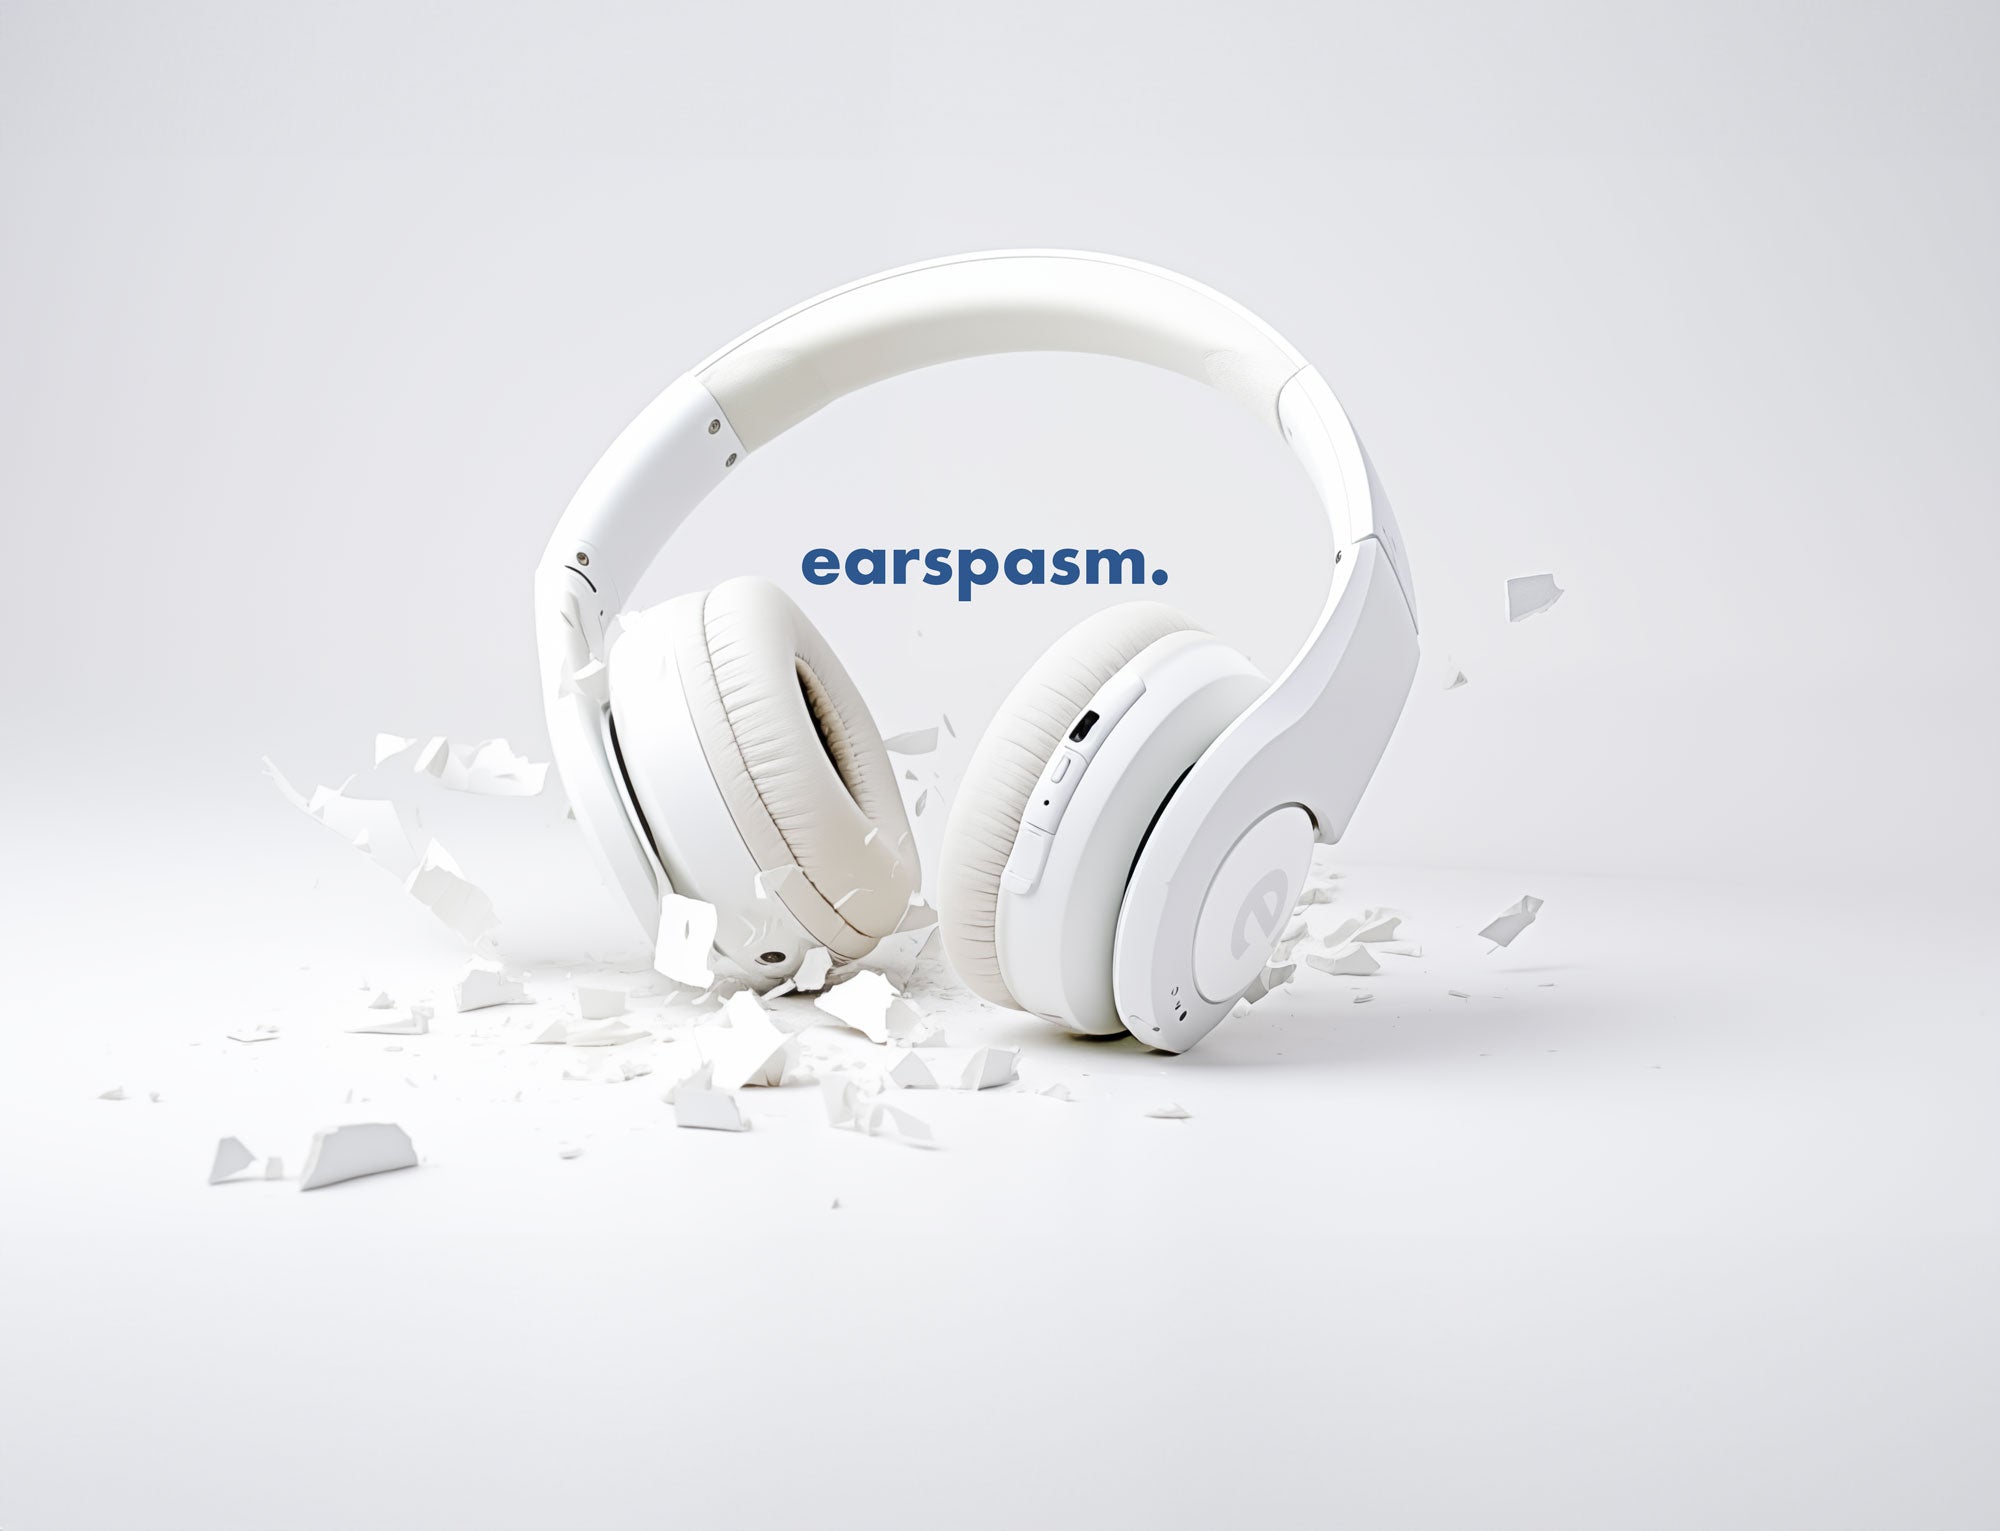 Broken white headphones in a white room with the word "earspasm" written in the center